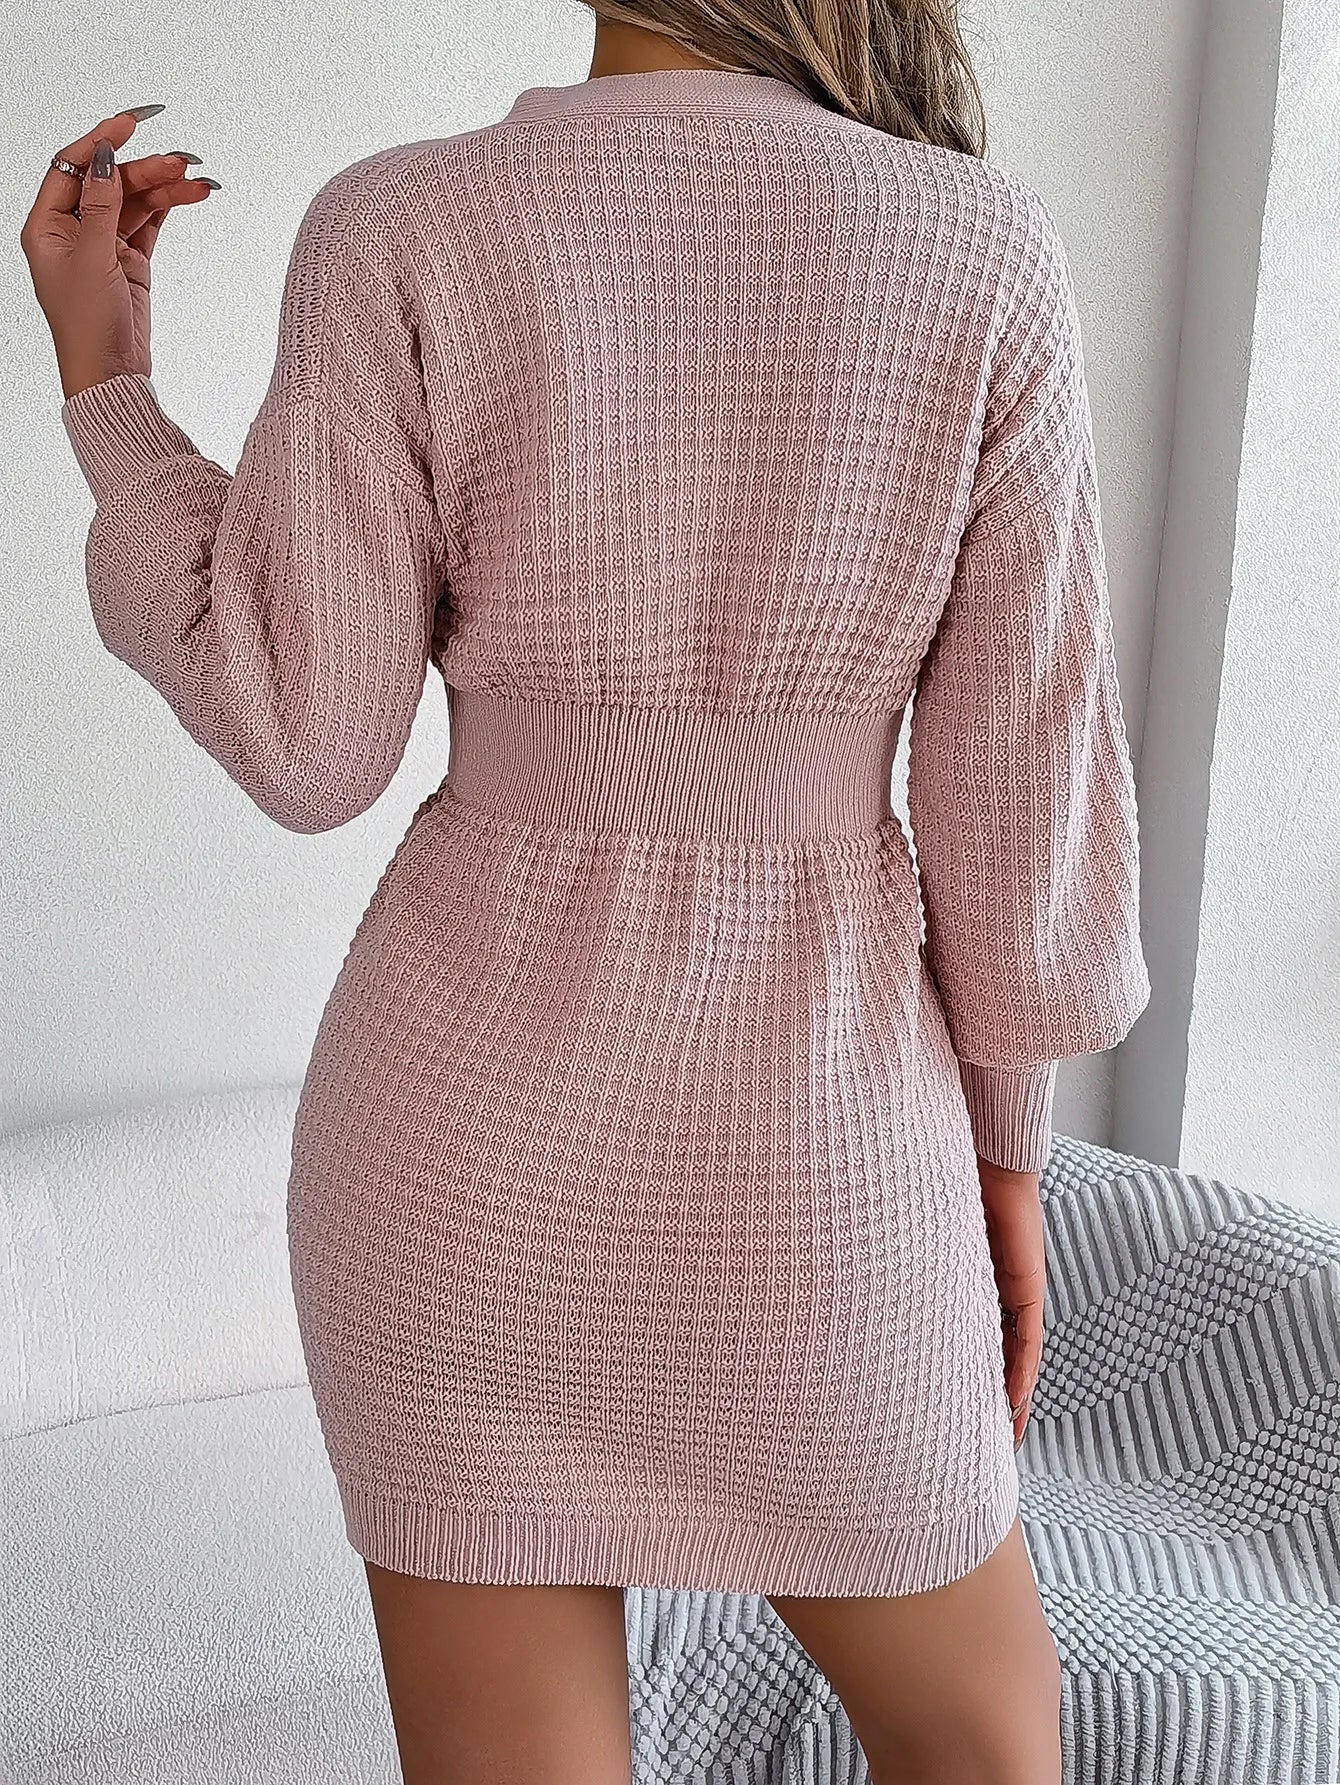 Stylish And Elegant Button-Down V-Neck Twist Lantern Sleeve Sweater Dress Women's Solid Color Casual Explosive Sweater Dresses